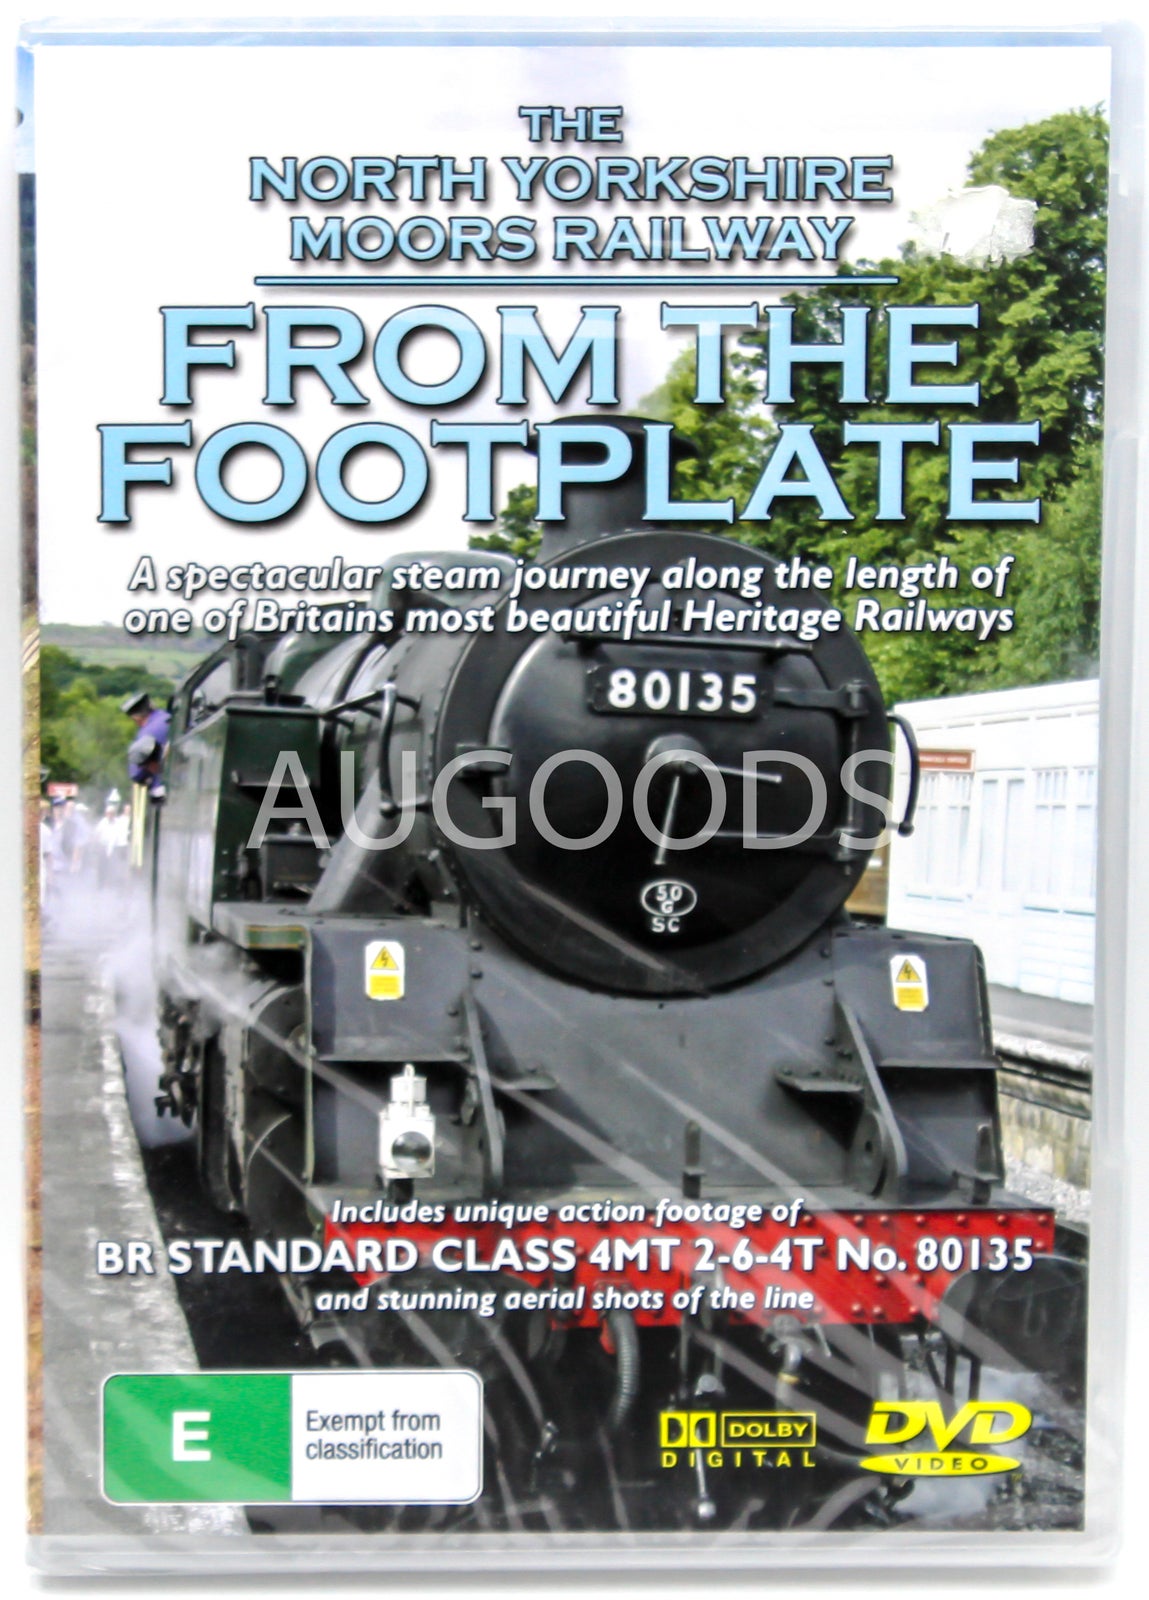 The North Yorkshire Moors Railway - From the Footplate DVD